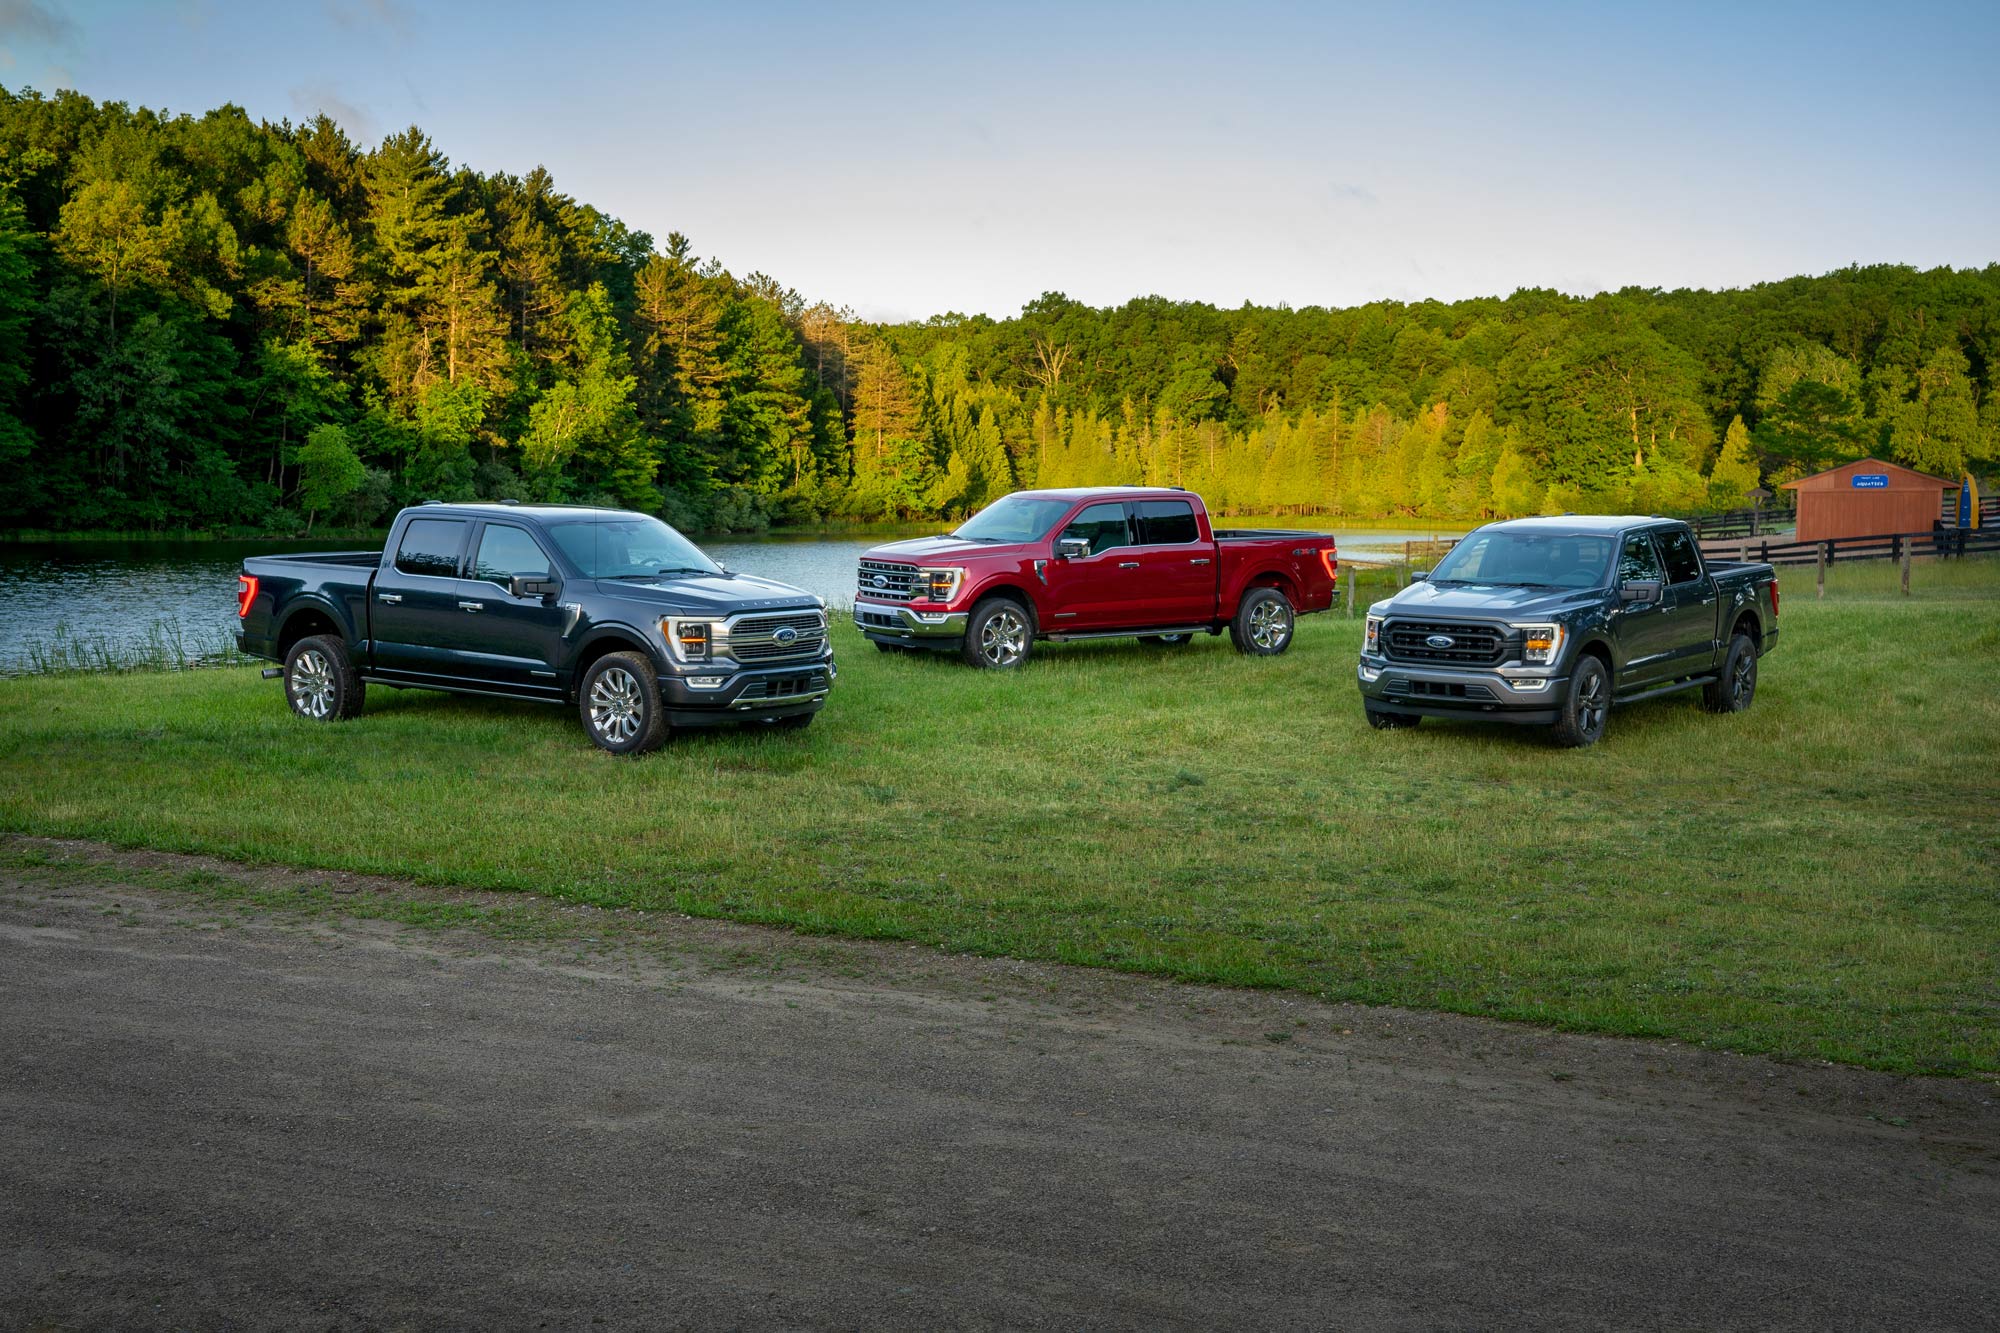 Three Ford F-150 trucks are parked on a grass area by a river with trees behind it.